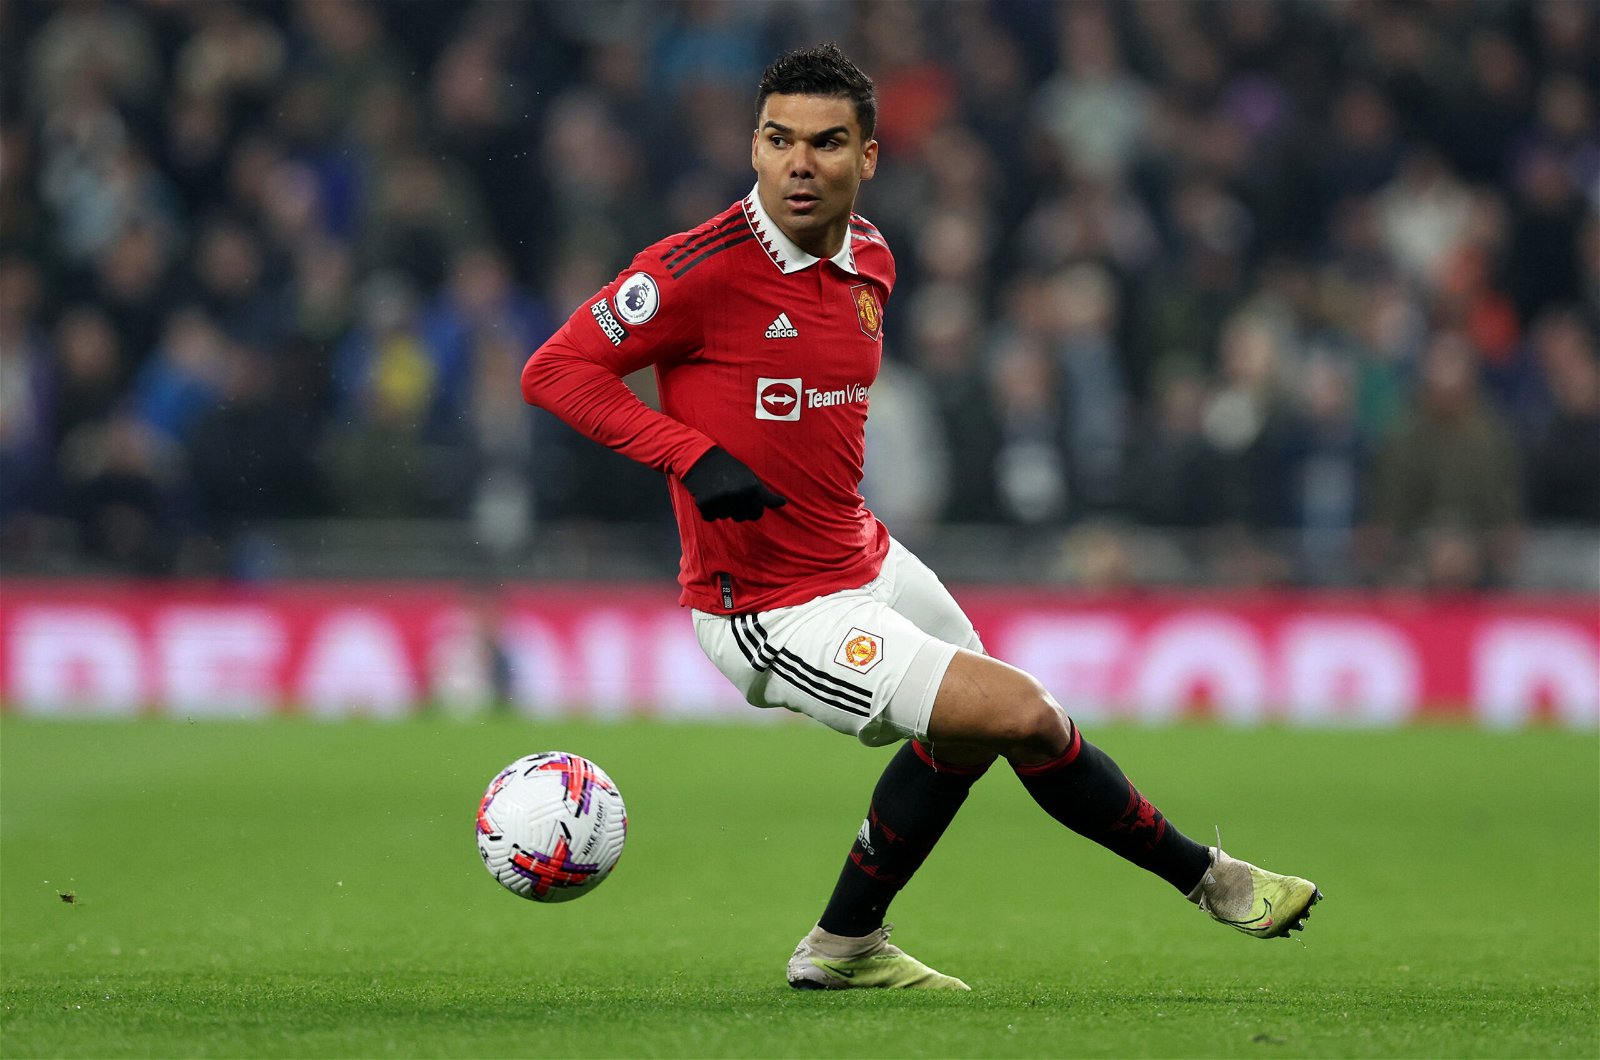 Casemiro is the highest paid Manchester United player